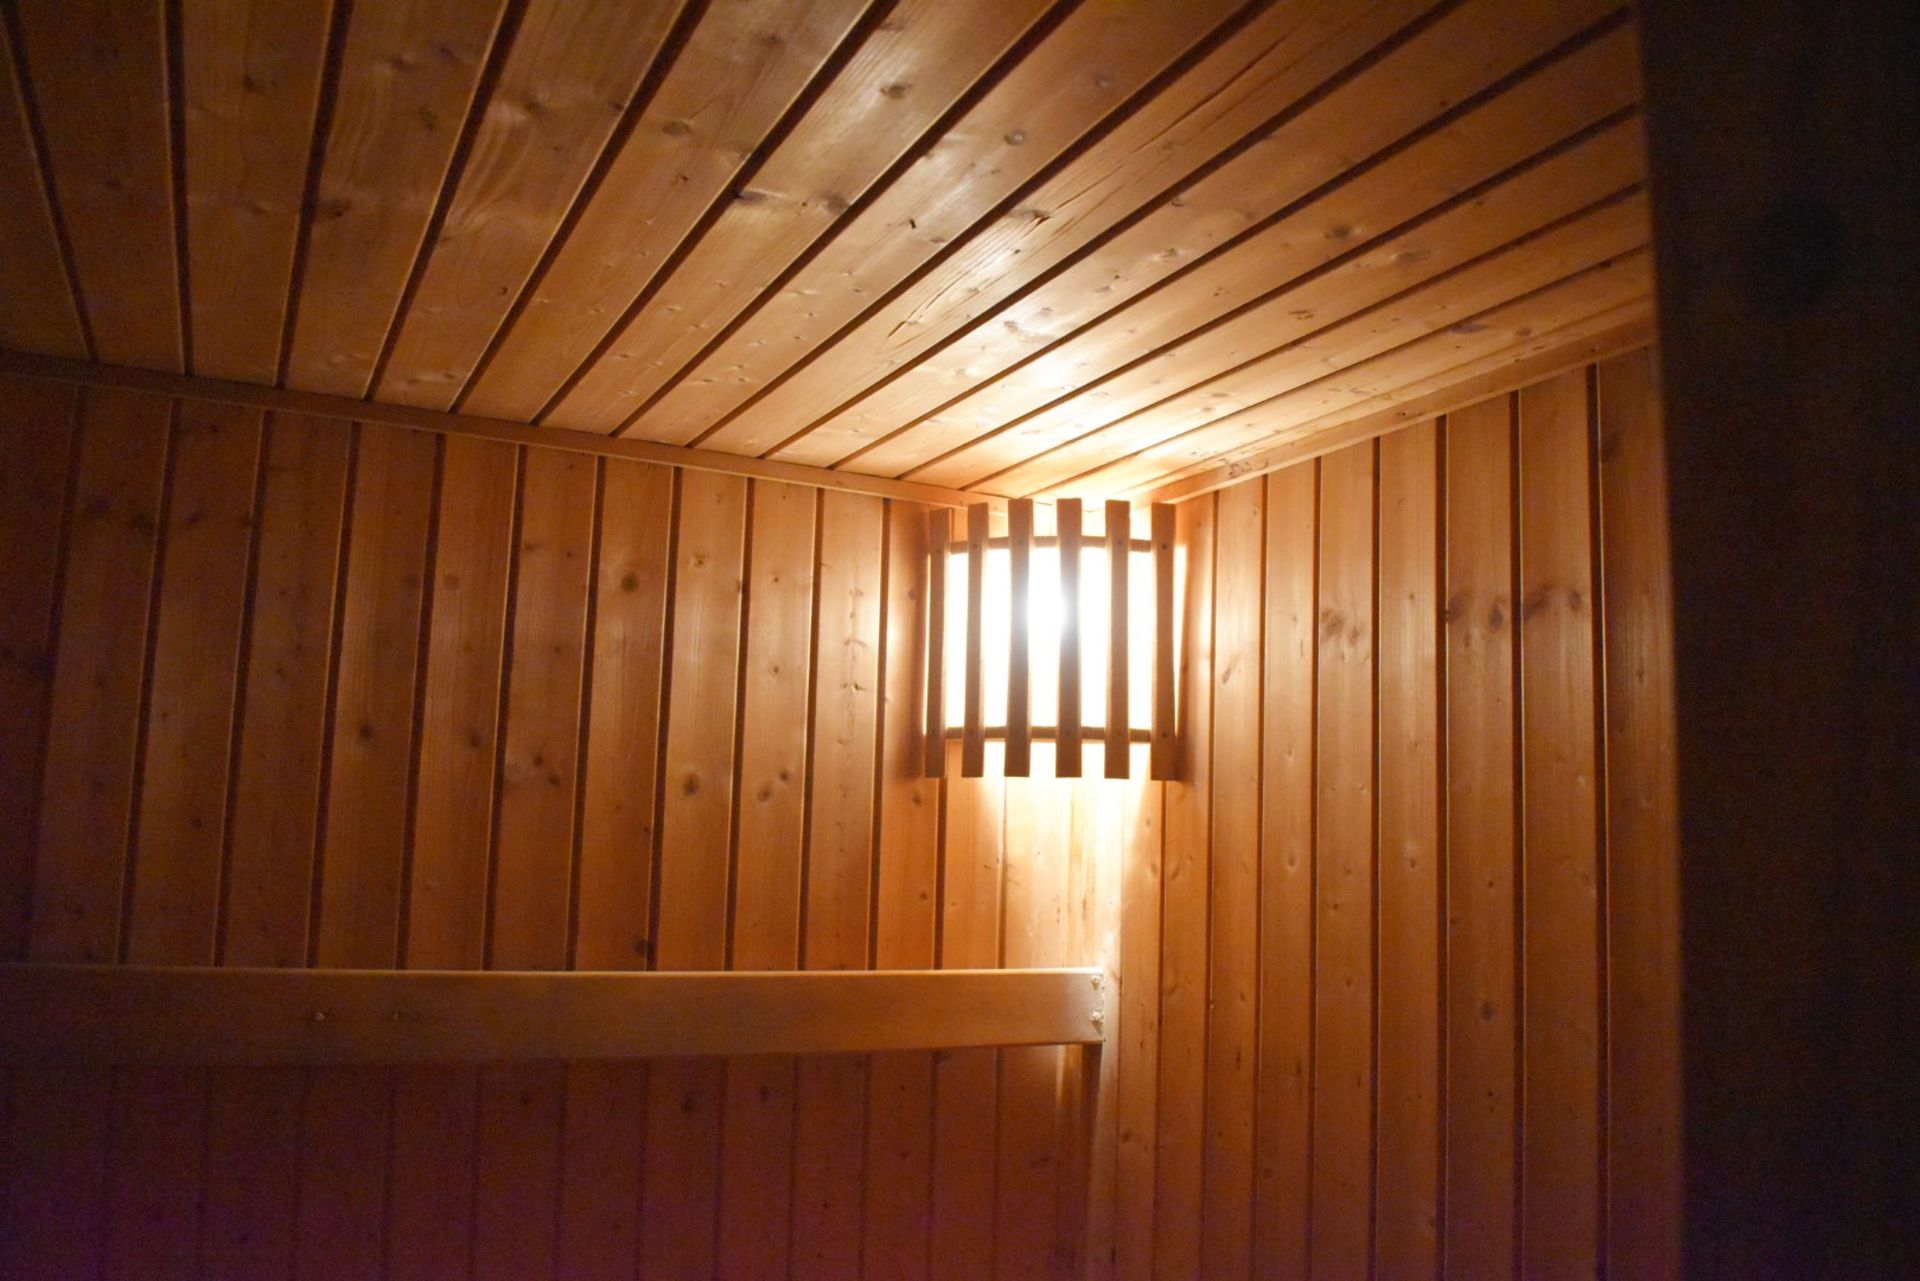 1 x Indoor Timber Sauna With Accessories and Glass Door - H200 x W130 x D230 cms - CL476 - Location: - Image 7 of 24